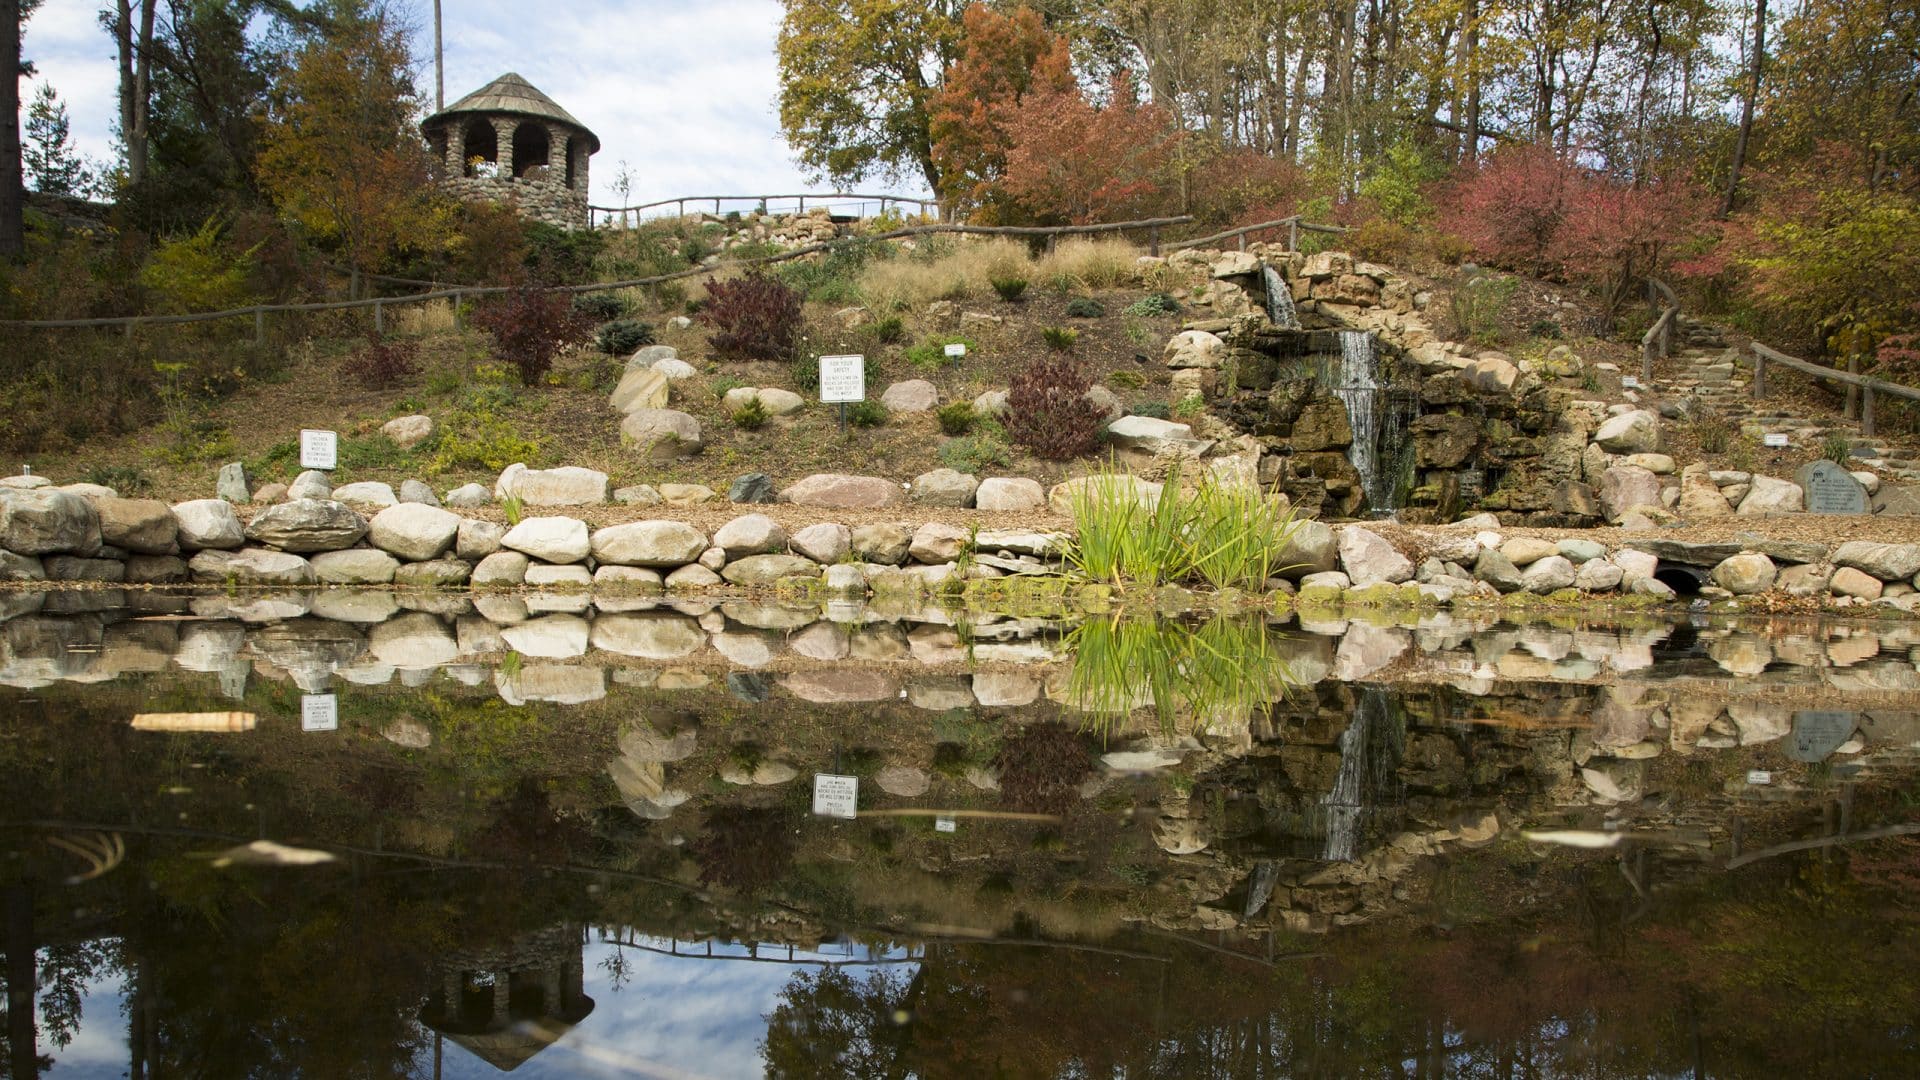 Pond and small waterfall in Slayton Arboretum.